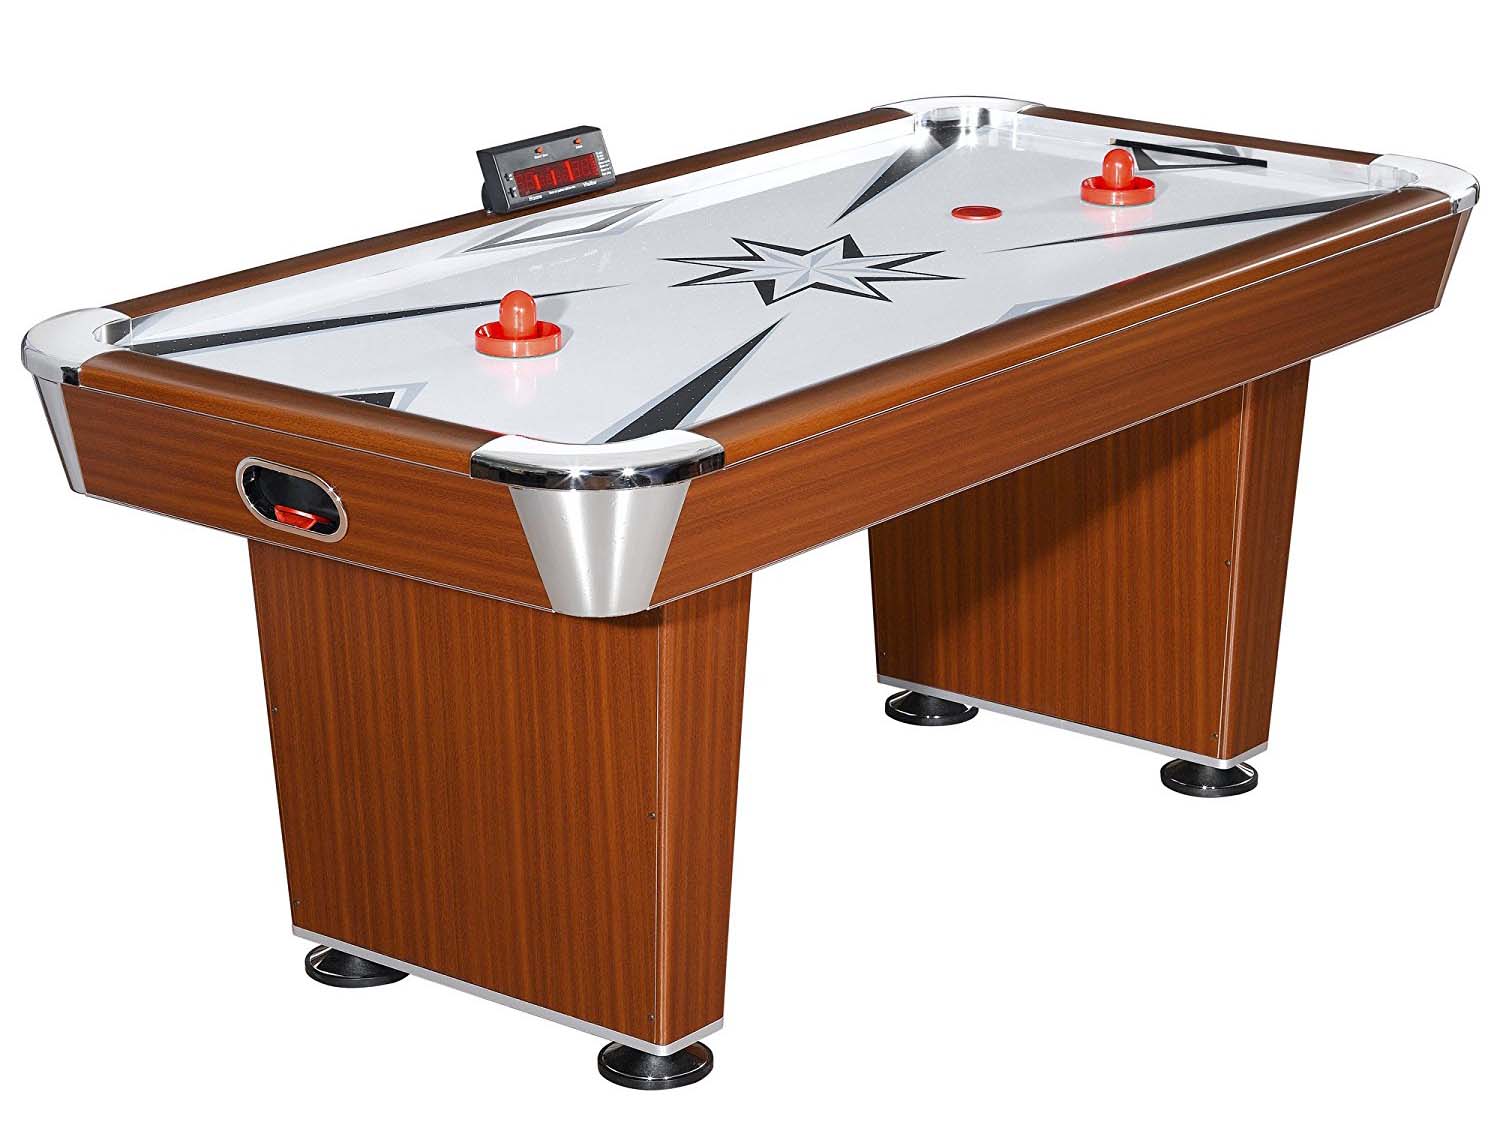 Hathaway Midtown 6’ Air Hockey Family Game Table